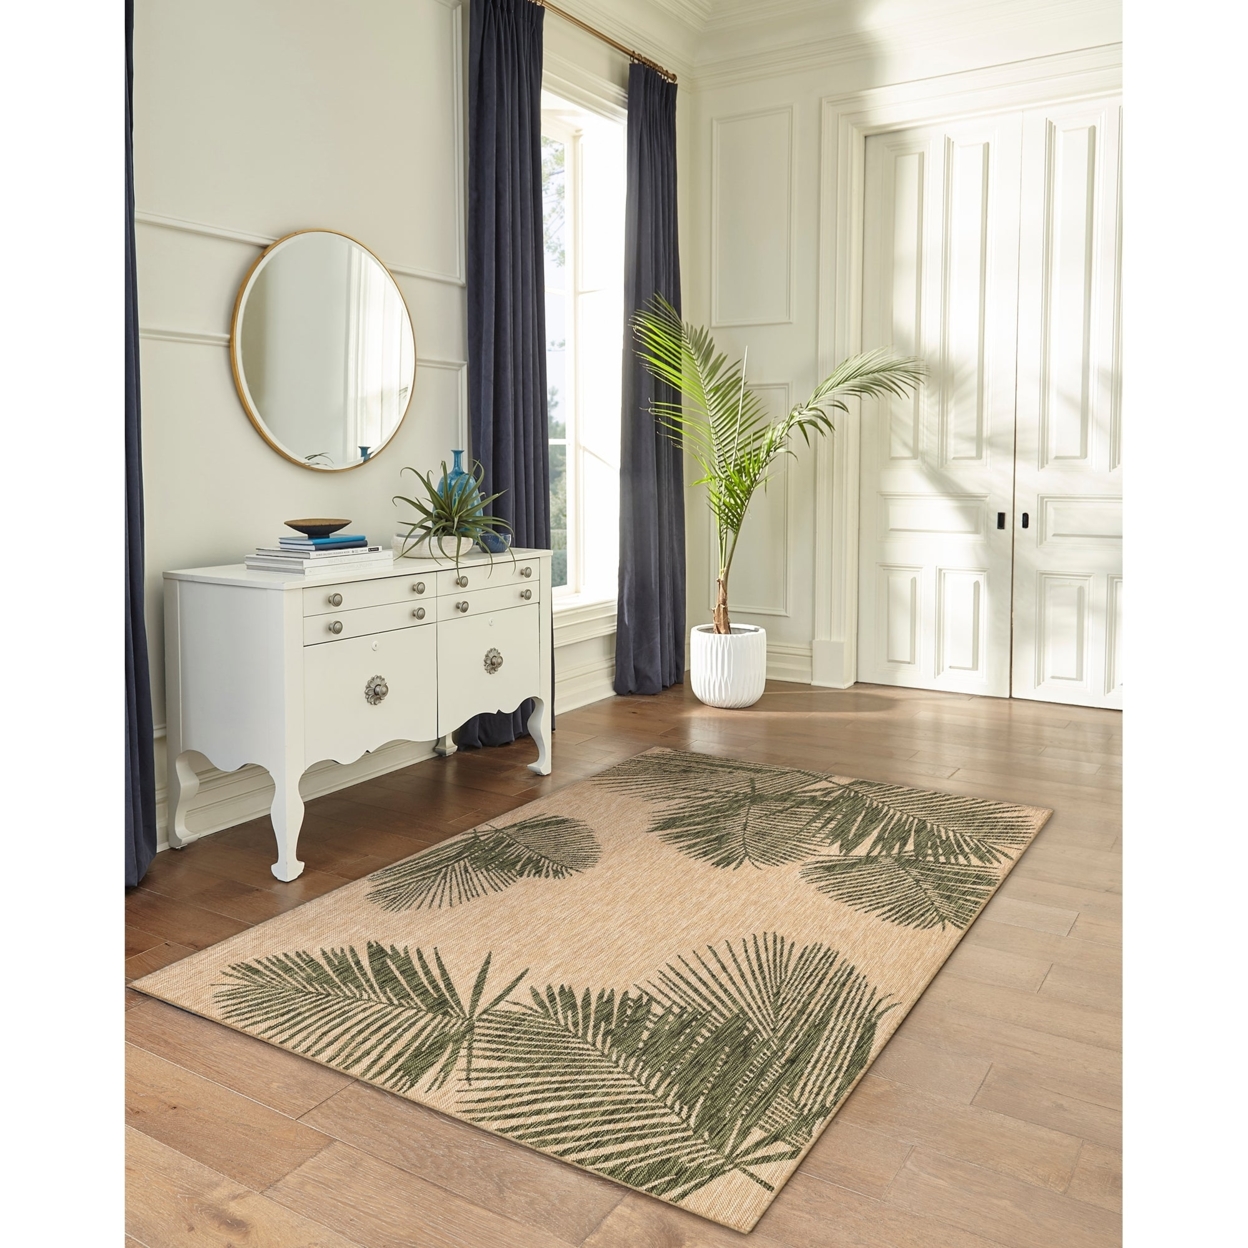 Liora Manne Carmel Palm Indoor Outdoor Area Rug Green - 7'10 Square